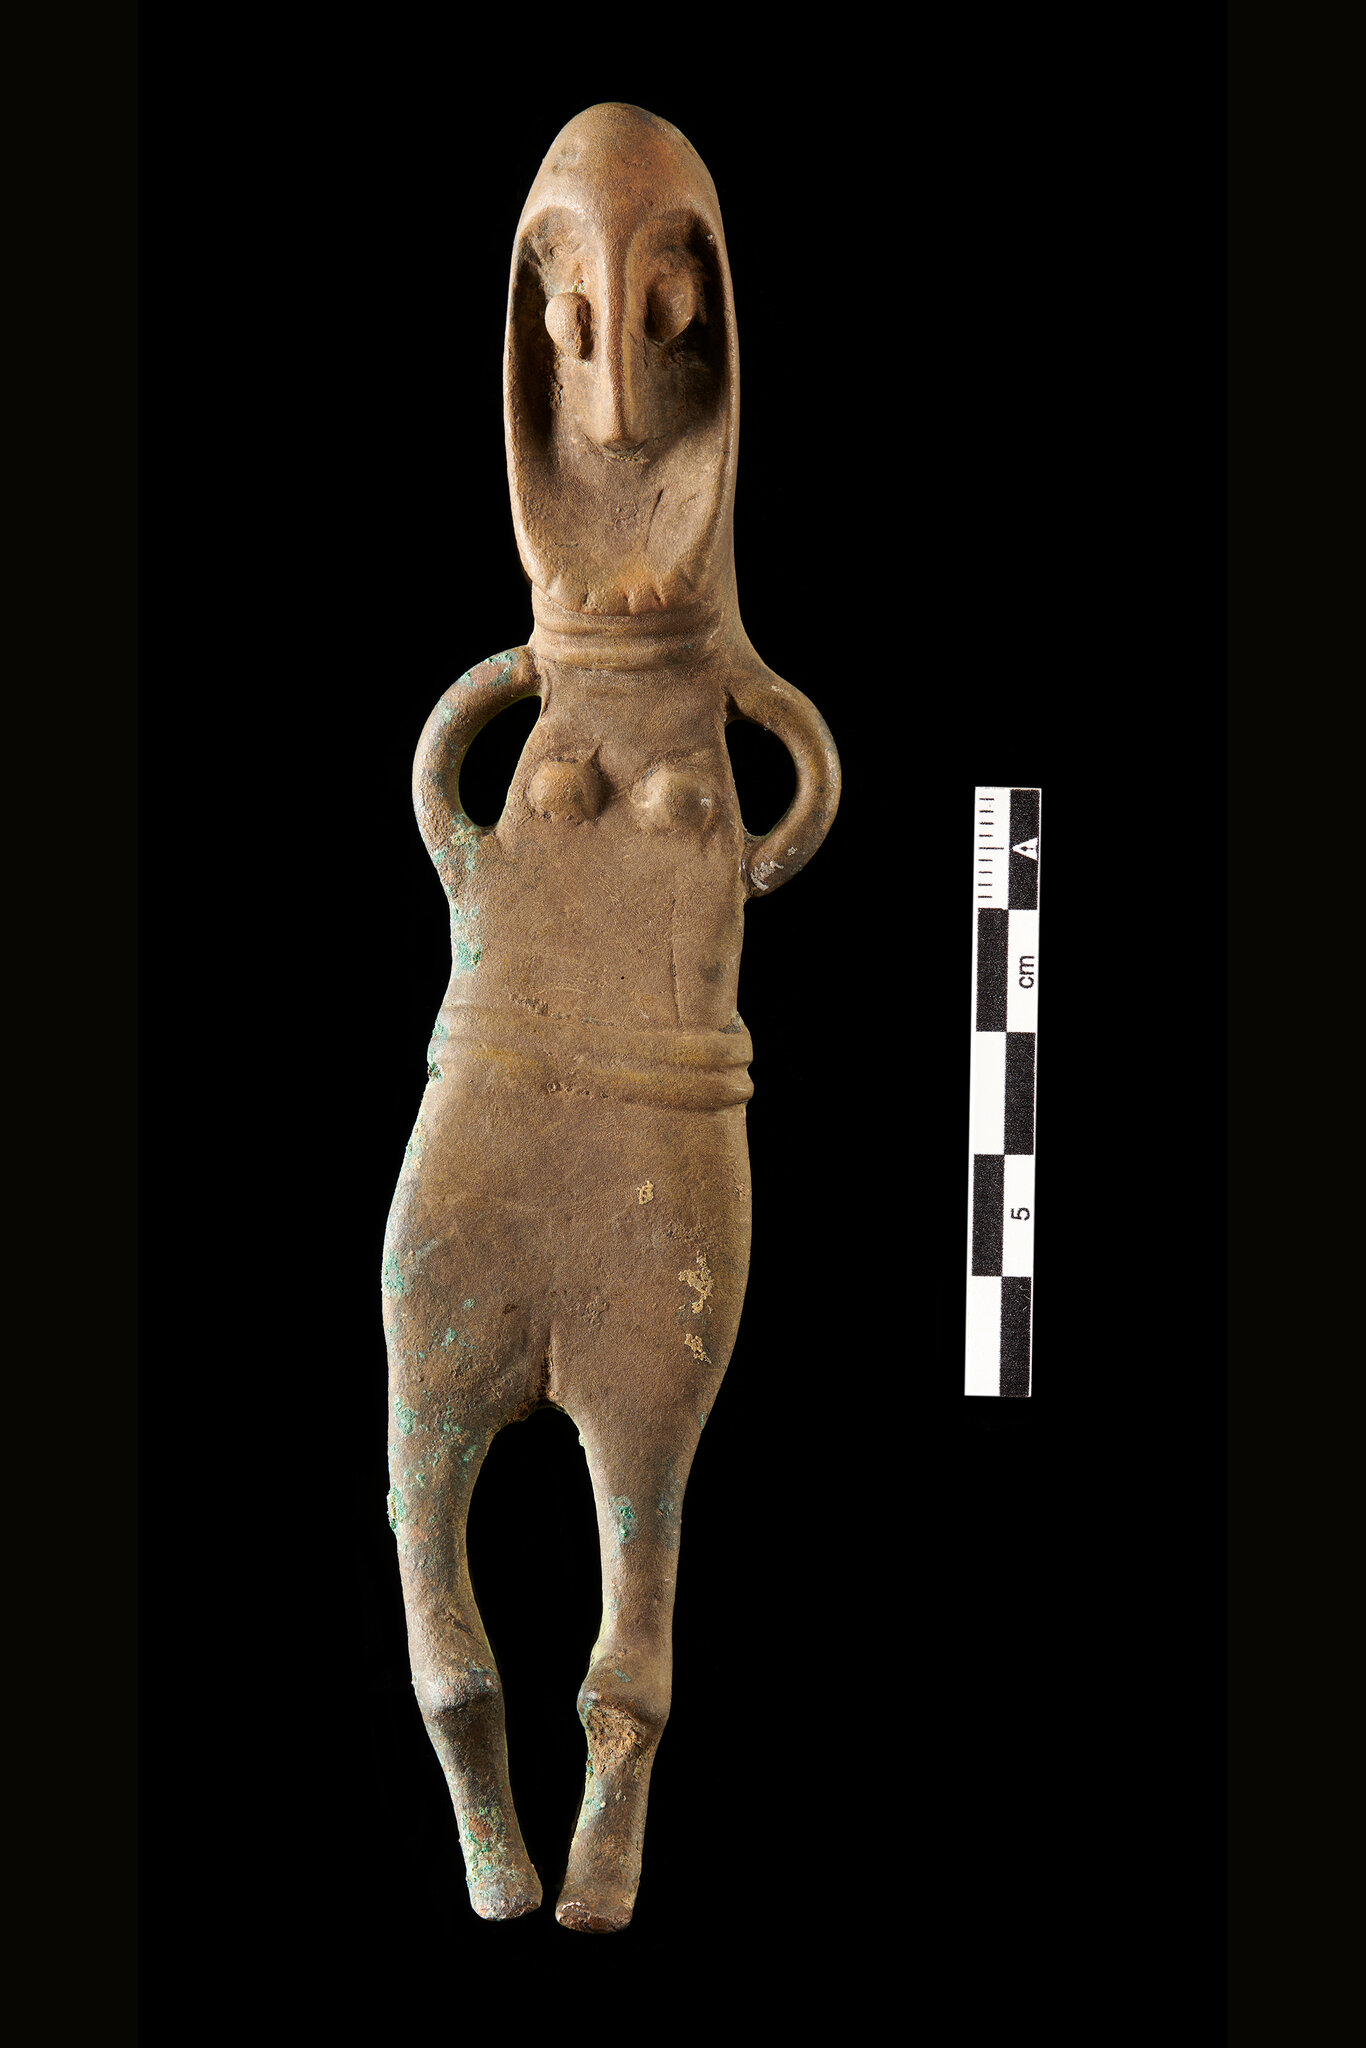 [:es]A 2,700-Year-Old Figurine Revives a Weighty Mystery[:]